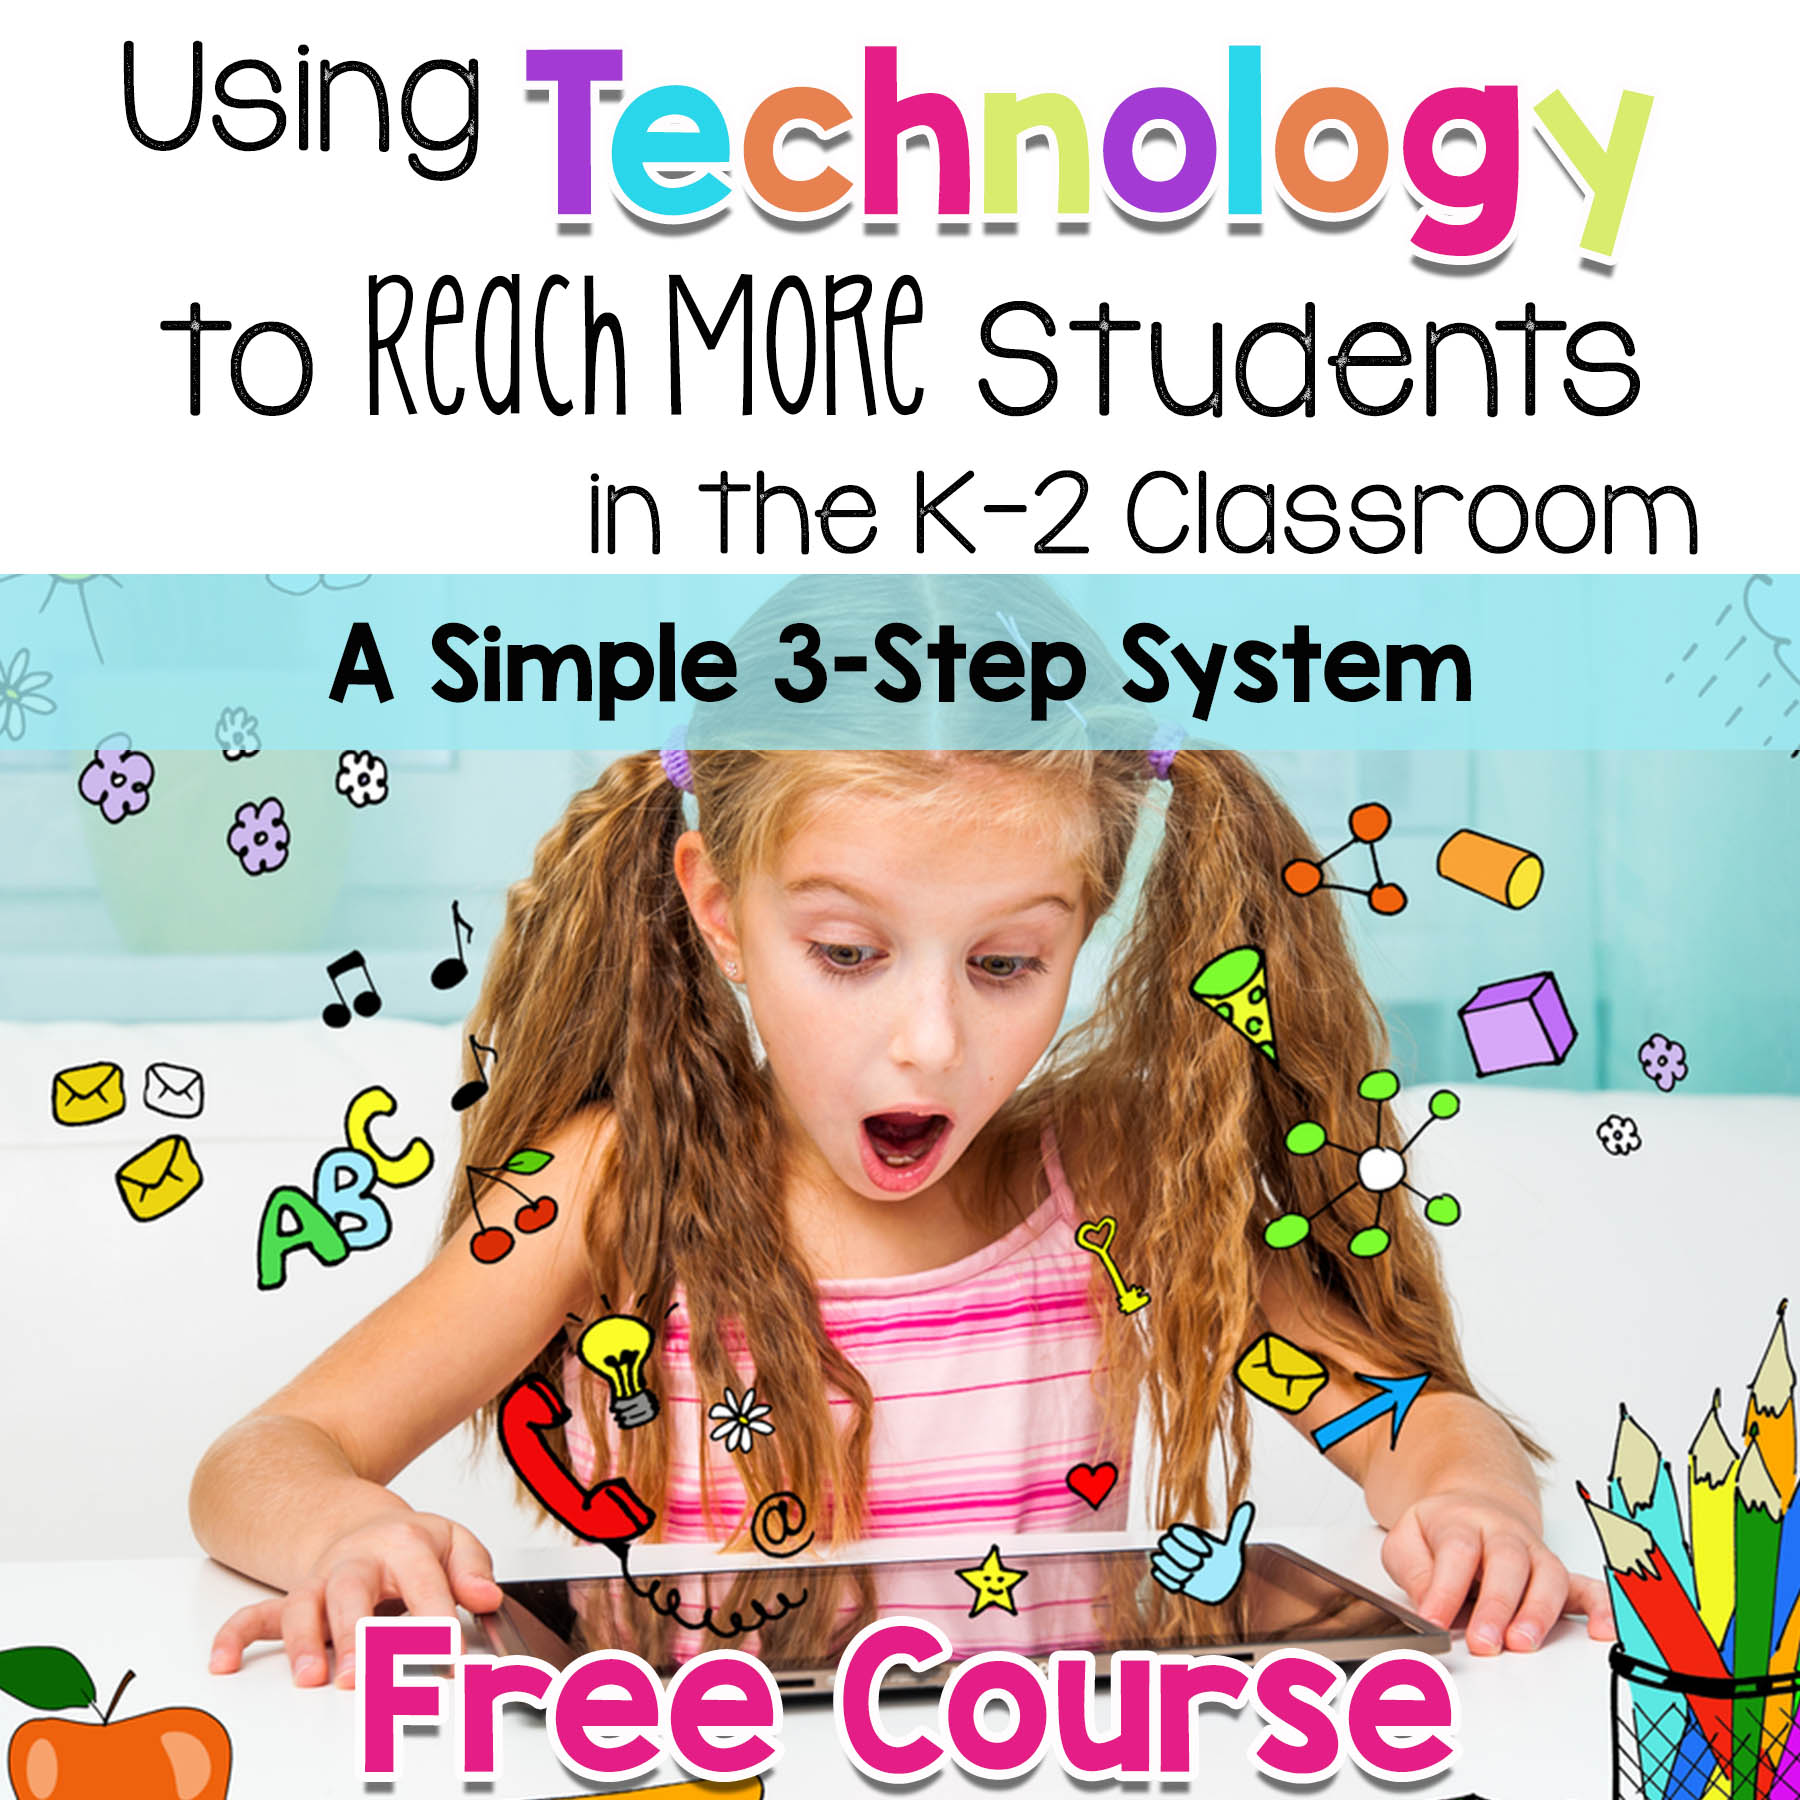 Use Tech to Reach More Students in K-2